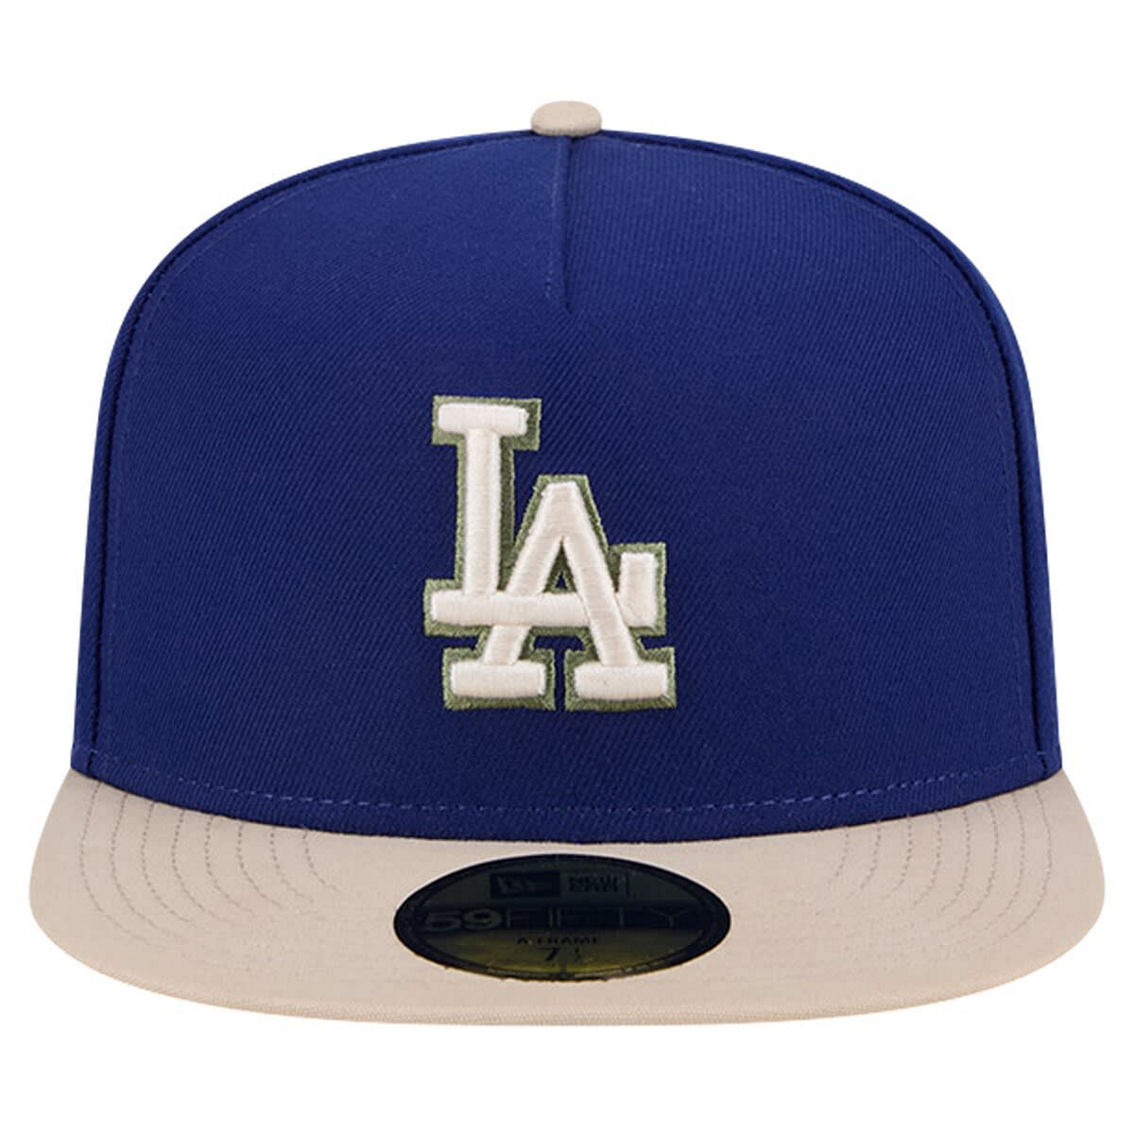 New Era Men's Royal Los Angeles Dodgers Canvas A-Frame 59FIFTY Fitted Hat - Image 3 of 4